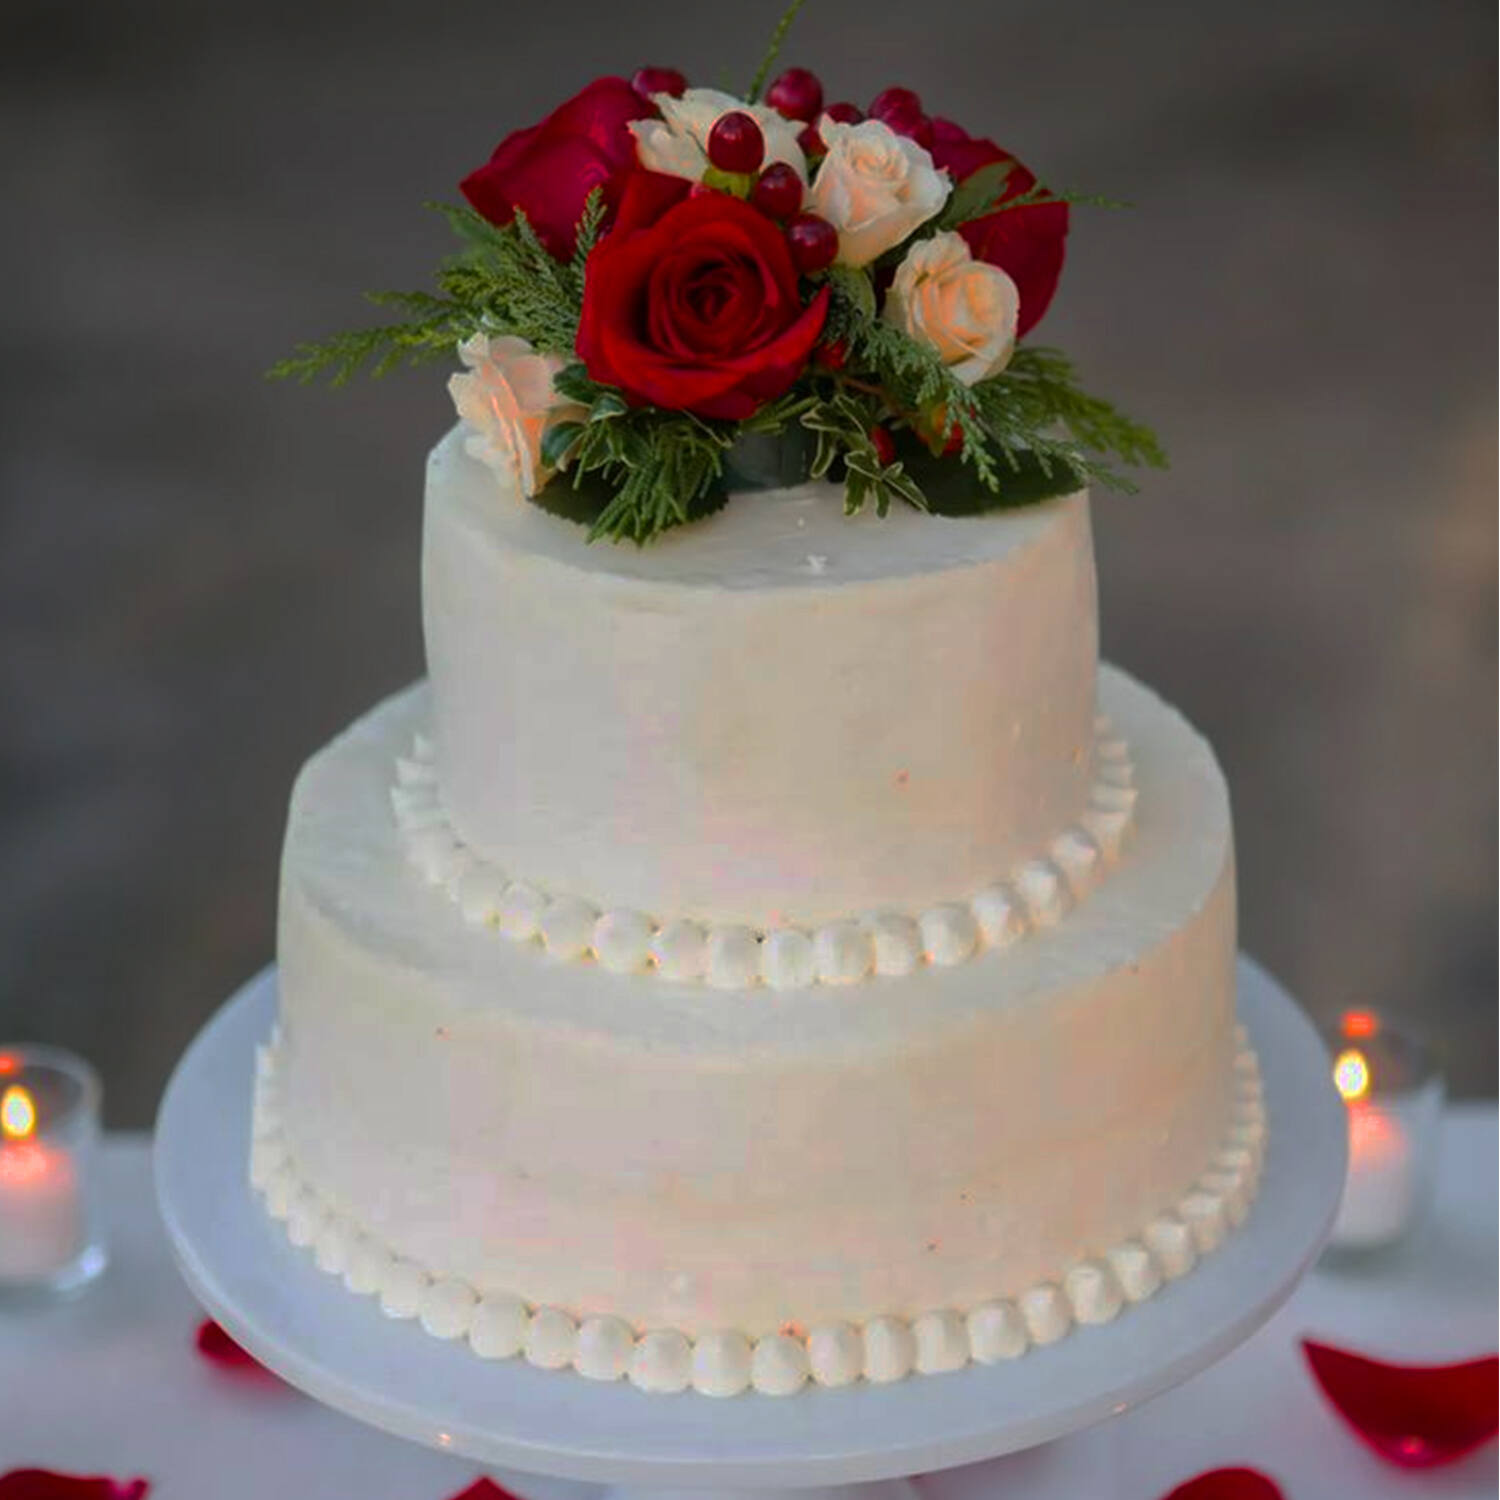 Multi Tier Cakes Online | Fresh 2, 3 Layer Cakes - MyFlowerTree